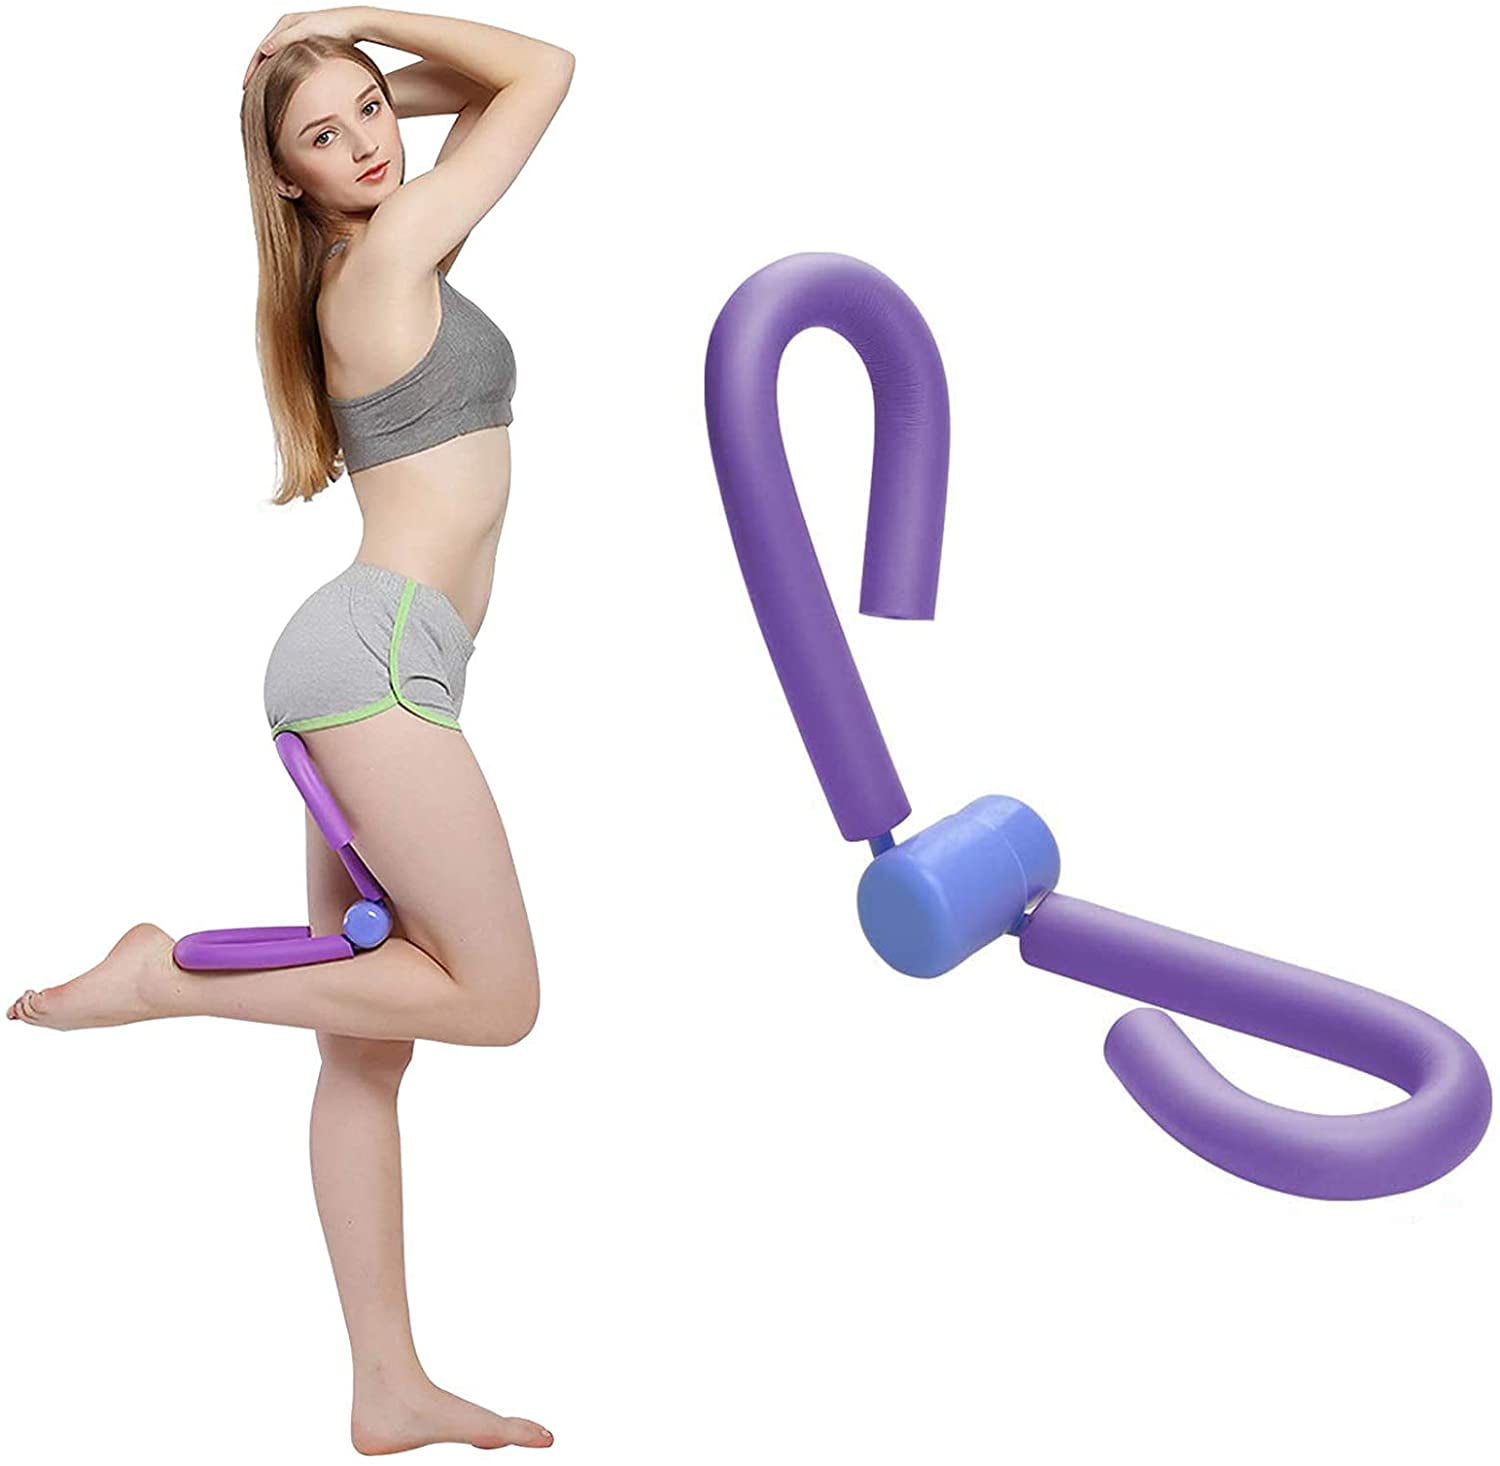  Thigh Master Inner Thigh Workout Equipment, Thigh Arm Toner  Trimmer for Home Gym Yoga Sport Weight Loss : Sports & Outdoors